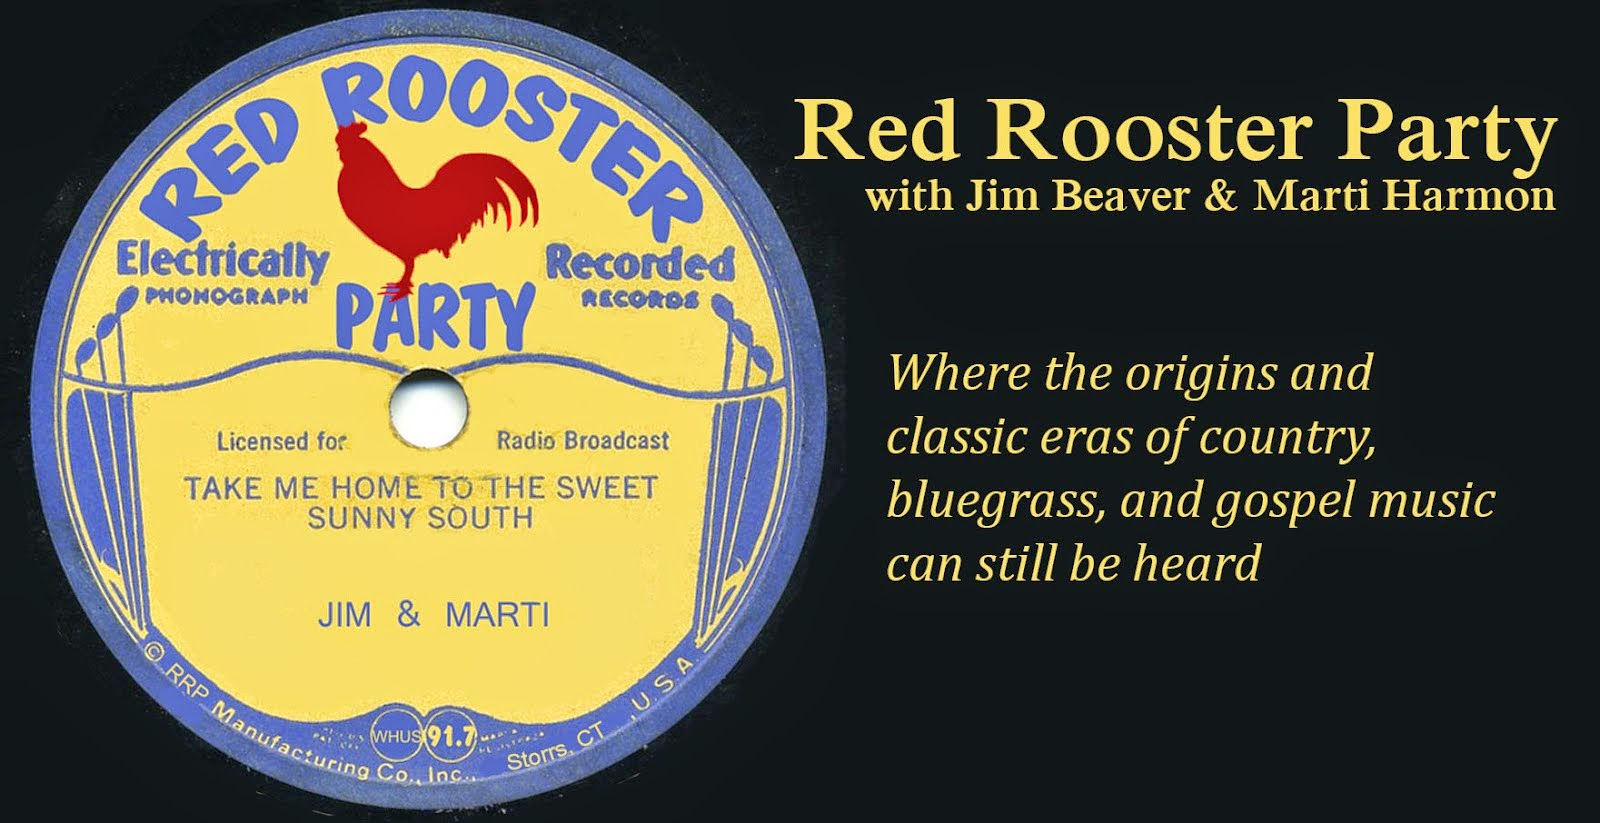 Red Rooster Party